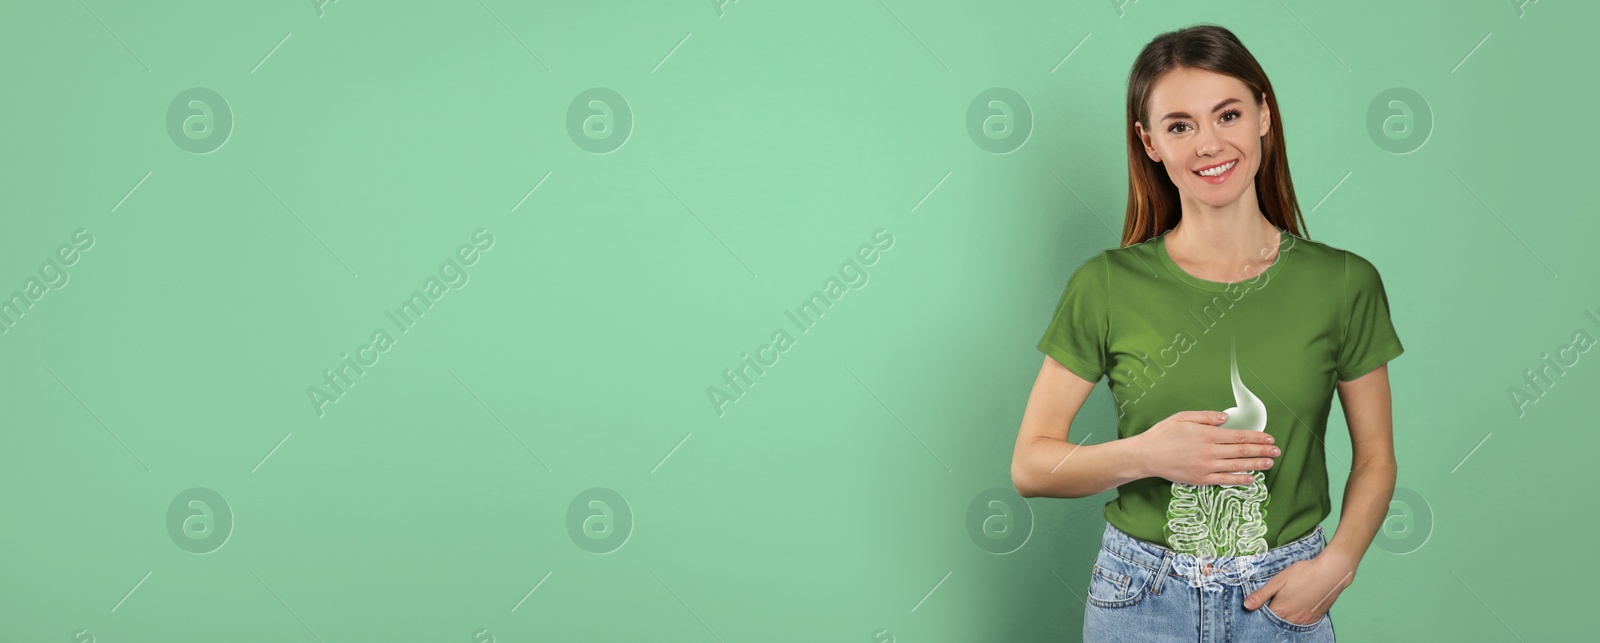 Image of Happy woman with healthy digestive system on turquoise background, banner design with space for text. Illustration of gastrointestinal tract